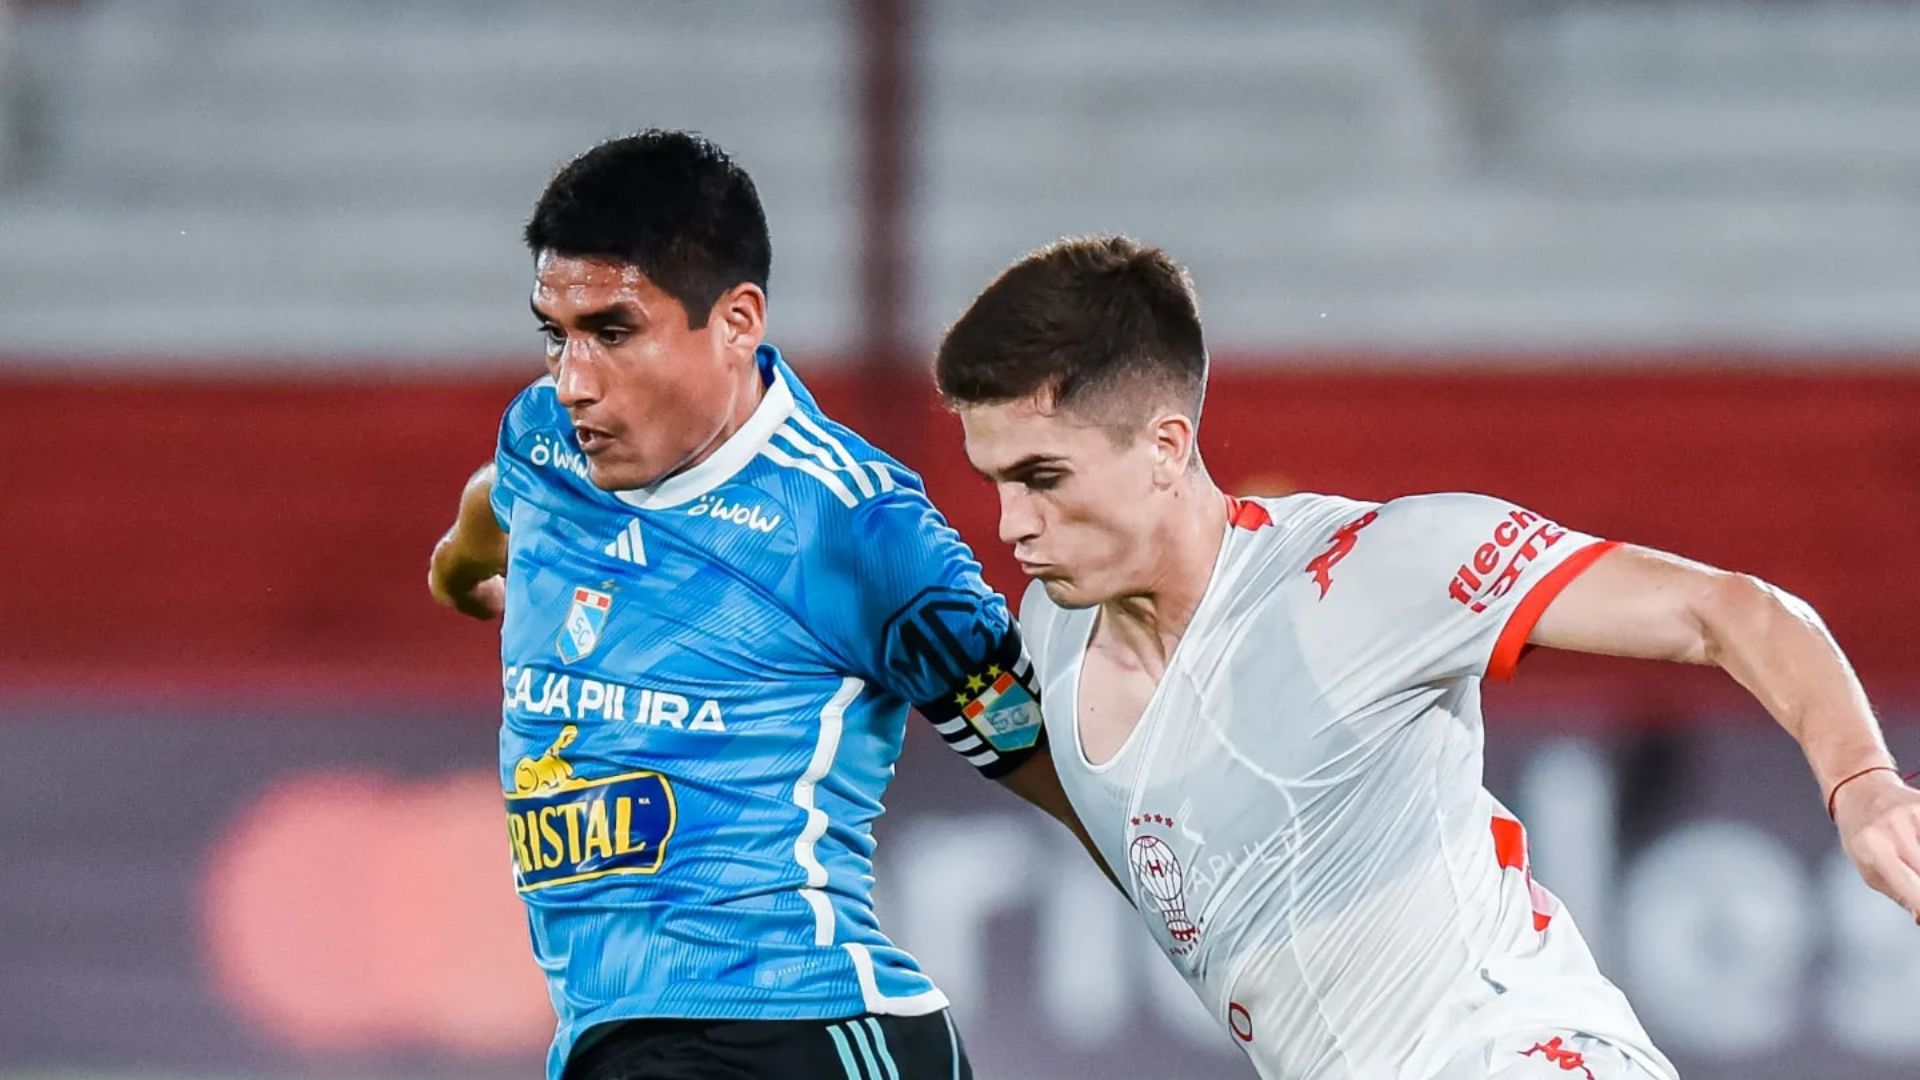 Sporting Cristal and Huracán will seek access to the group stage of the Copa Libertadores.